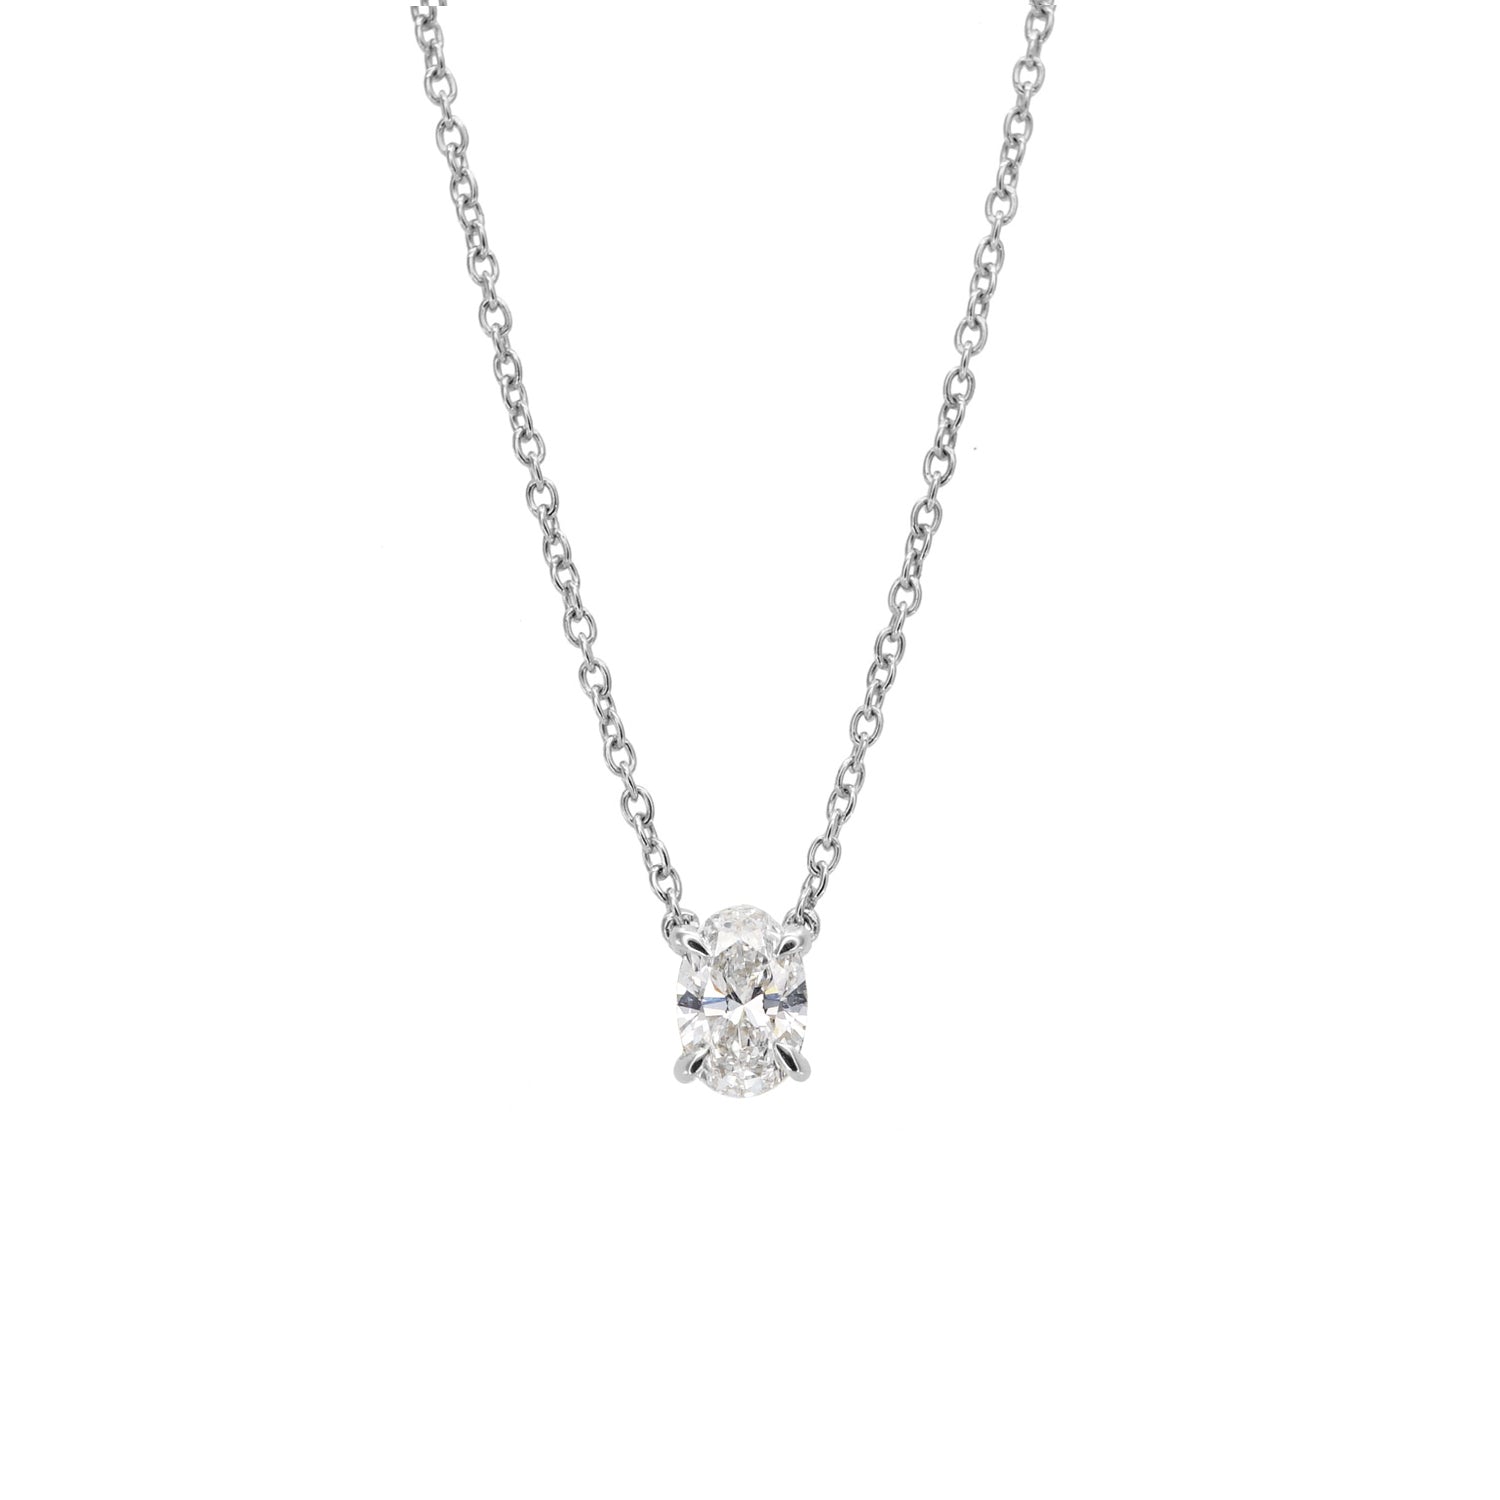 Oval Solitaire Diamond Necklace - 0.50ct